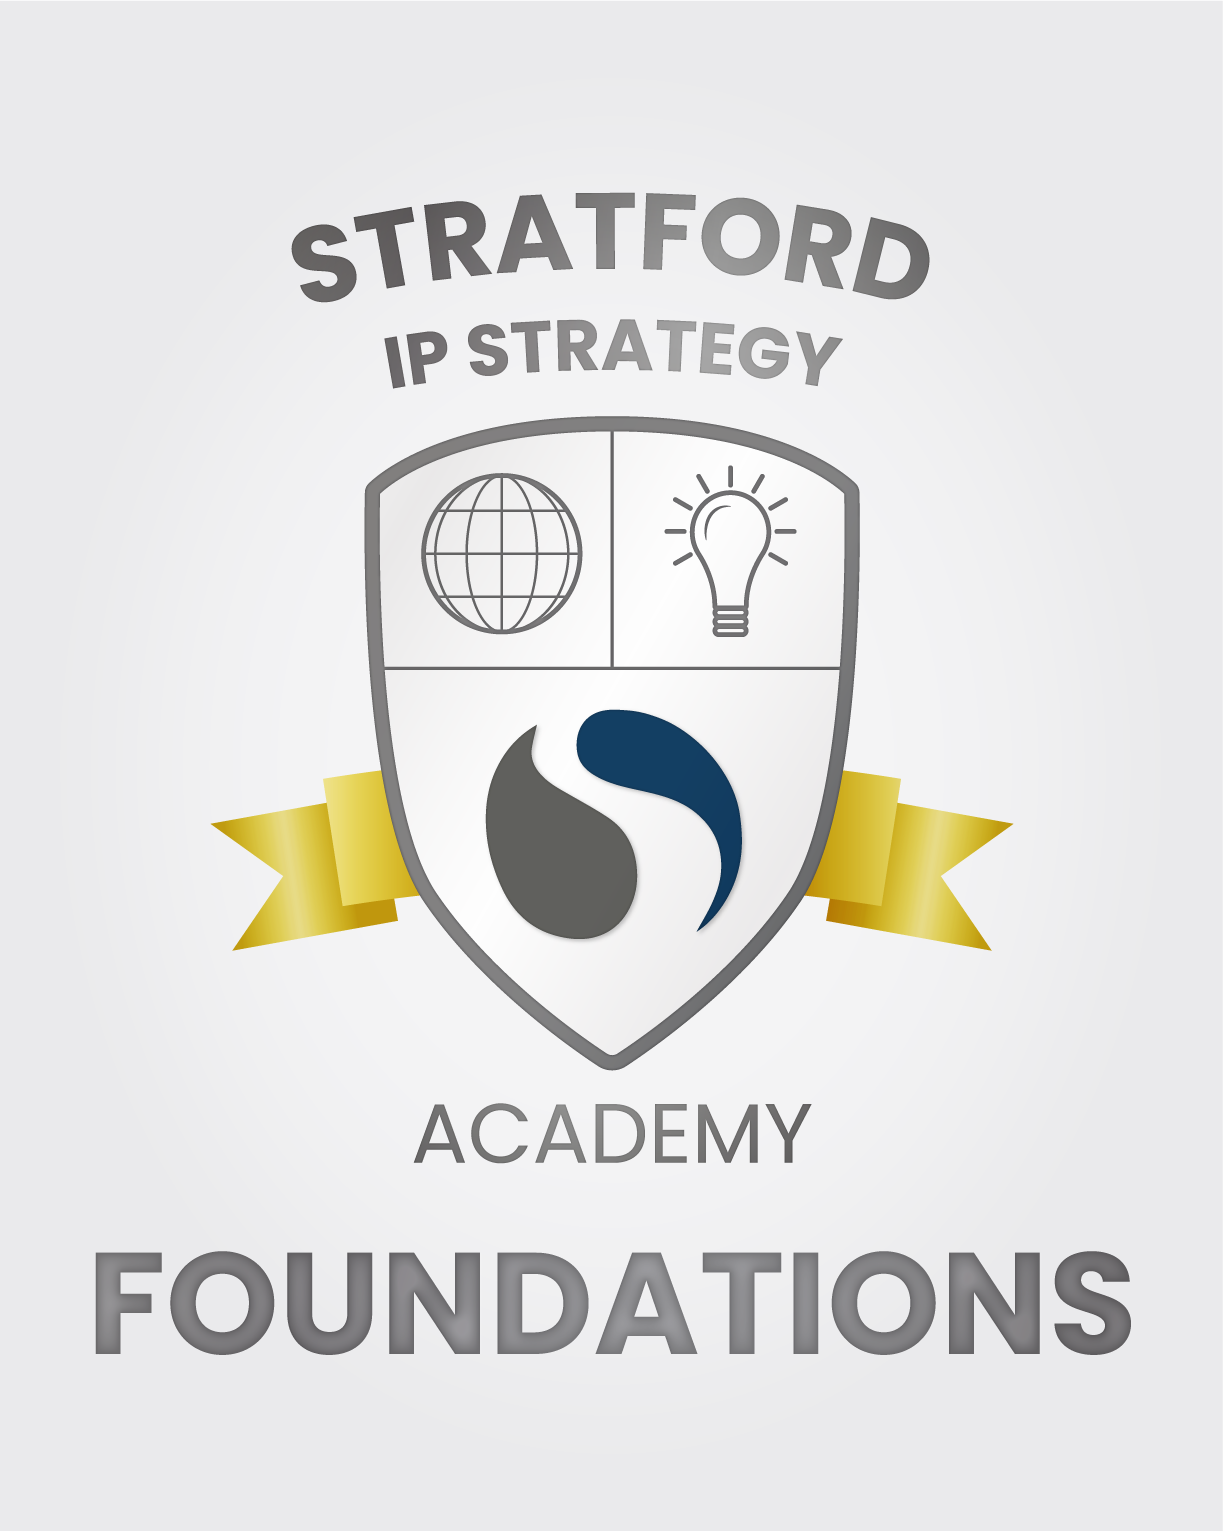 Foundations membership tile - IP Strategy Academy logo with text "Foundations" on a white background